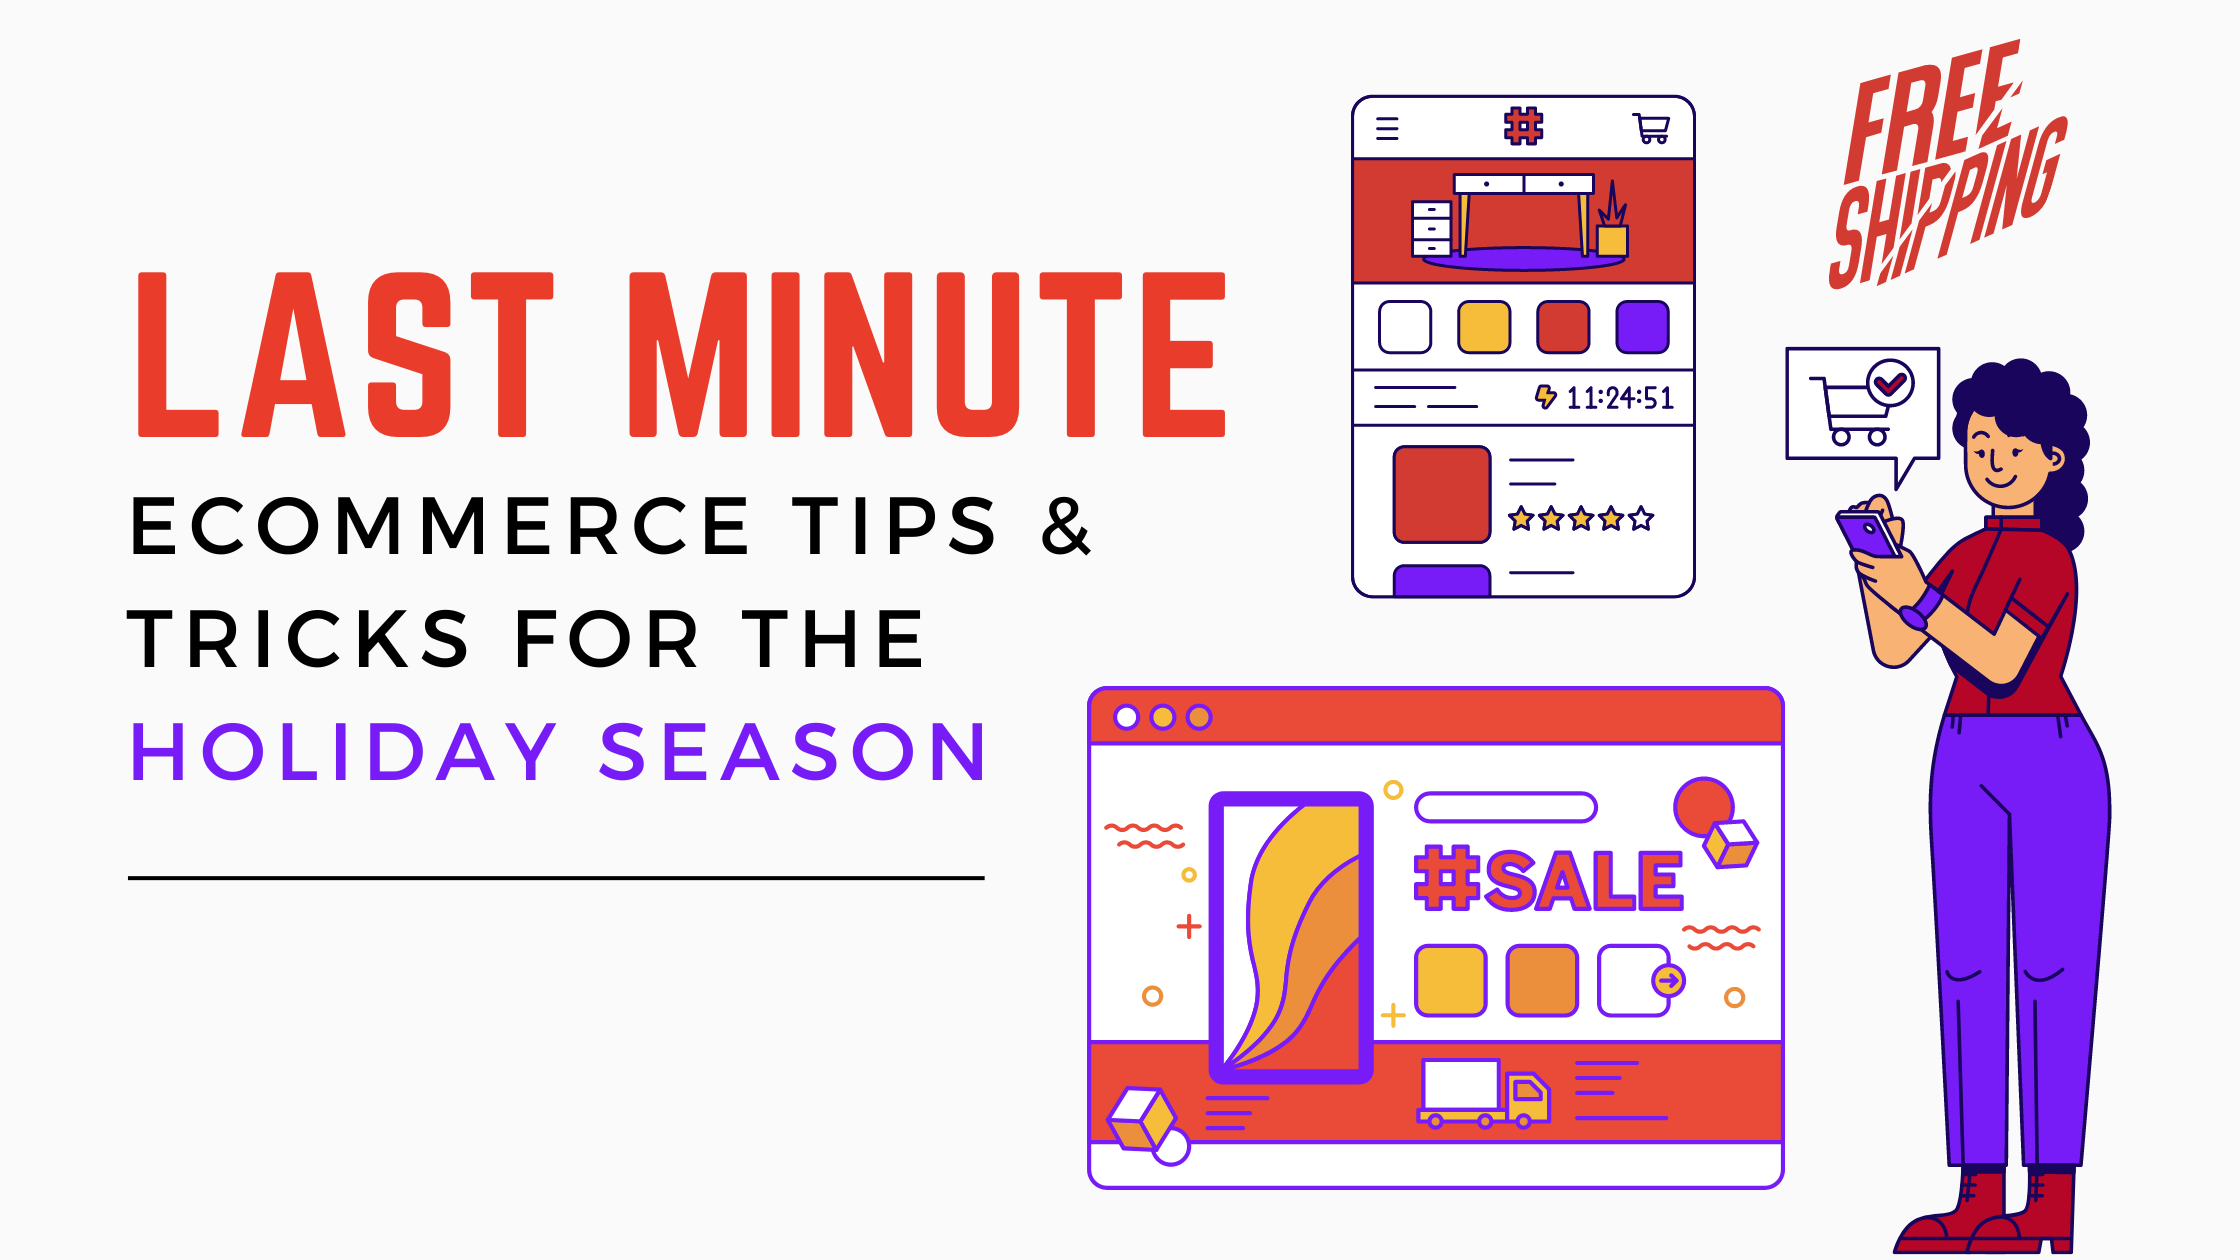 holiday sales, holiday sales tips and tricks, holiday ecommerce tips, online sales tips, holiday sales, holiday discounts, holiday web design, 2022 holiday sales, last minute web design, last minute ecommerce, last minute ecommerce tips, last minute tips holidays, last minute online store tips, selling online tips